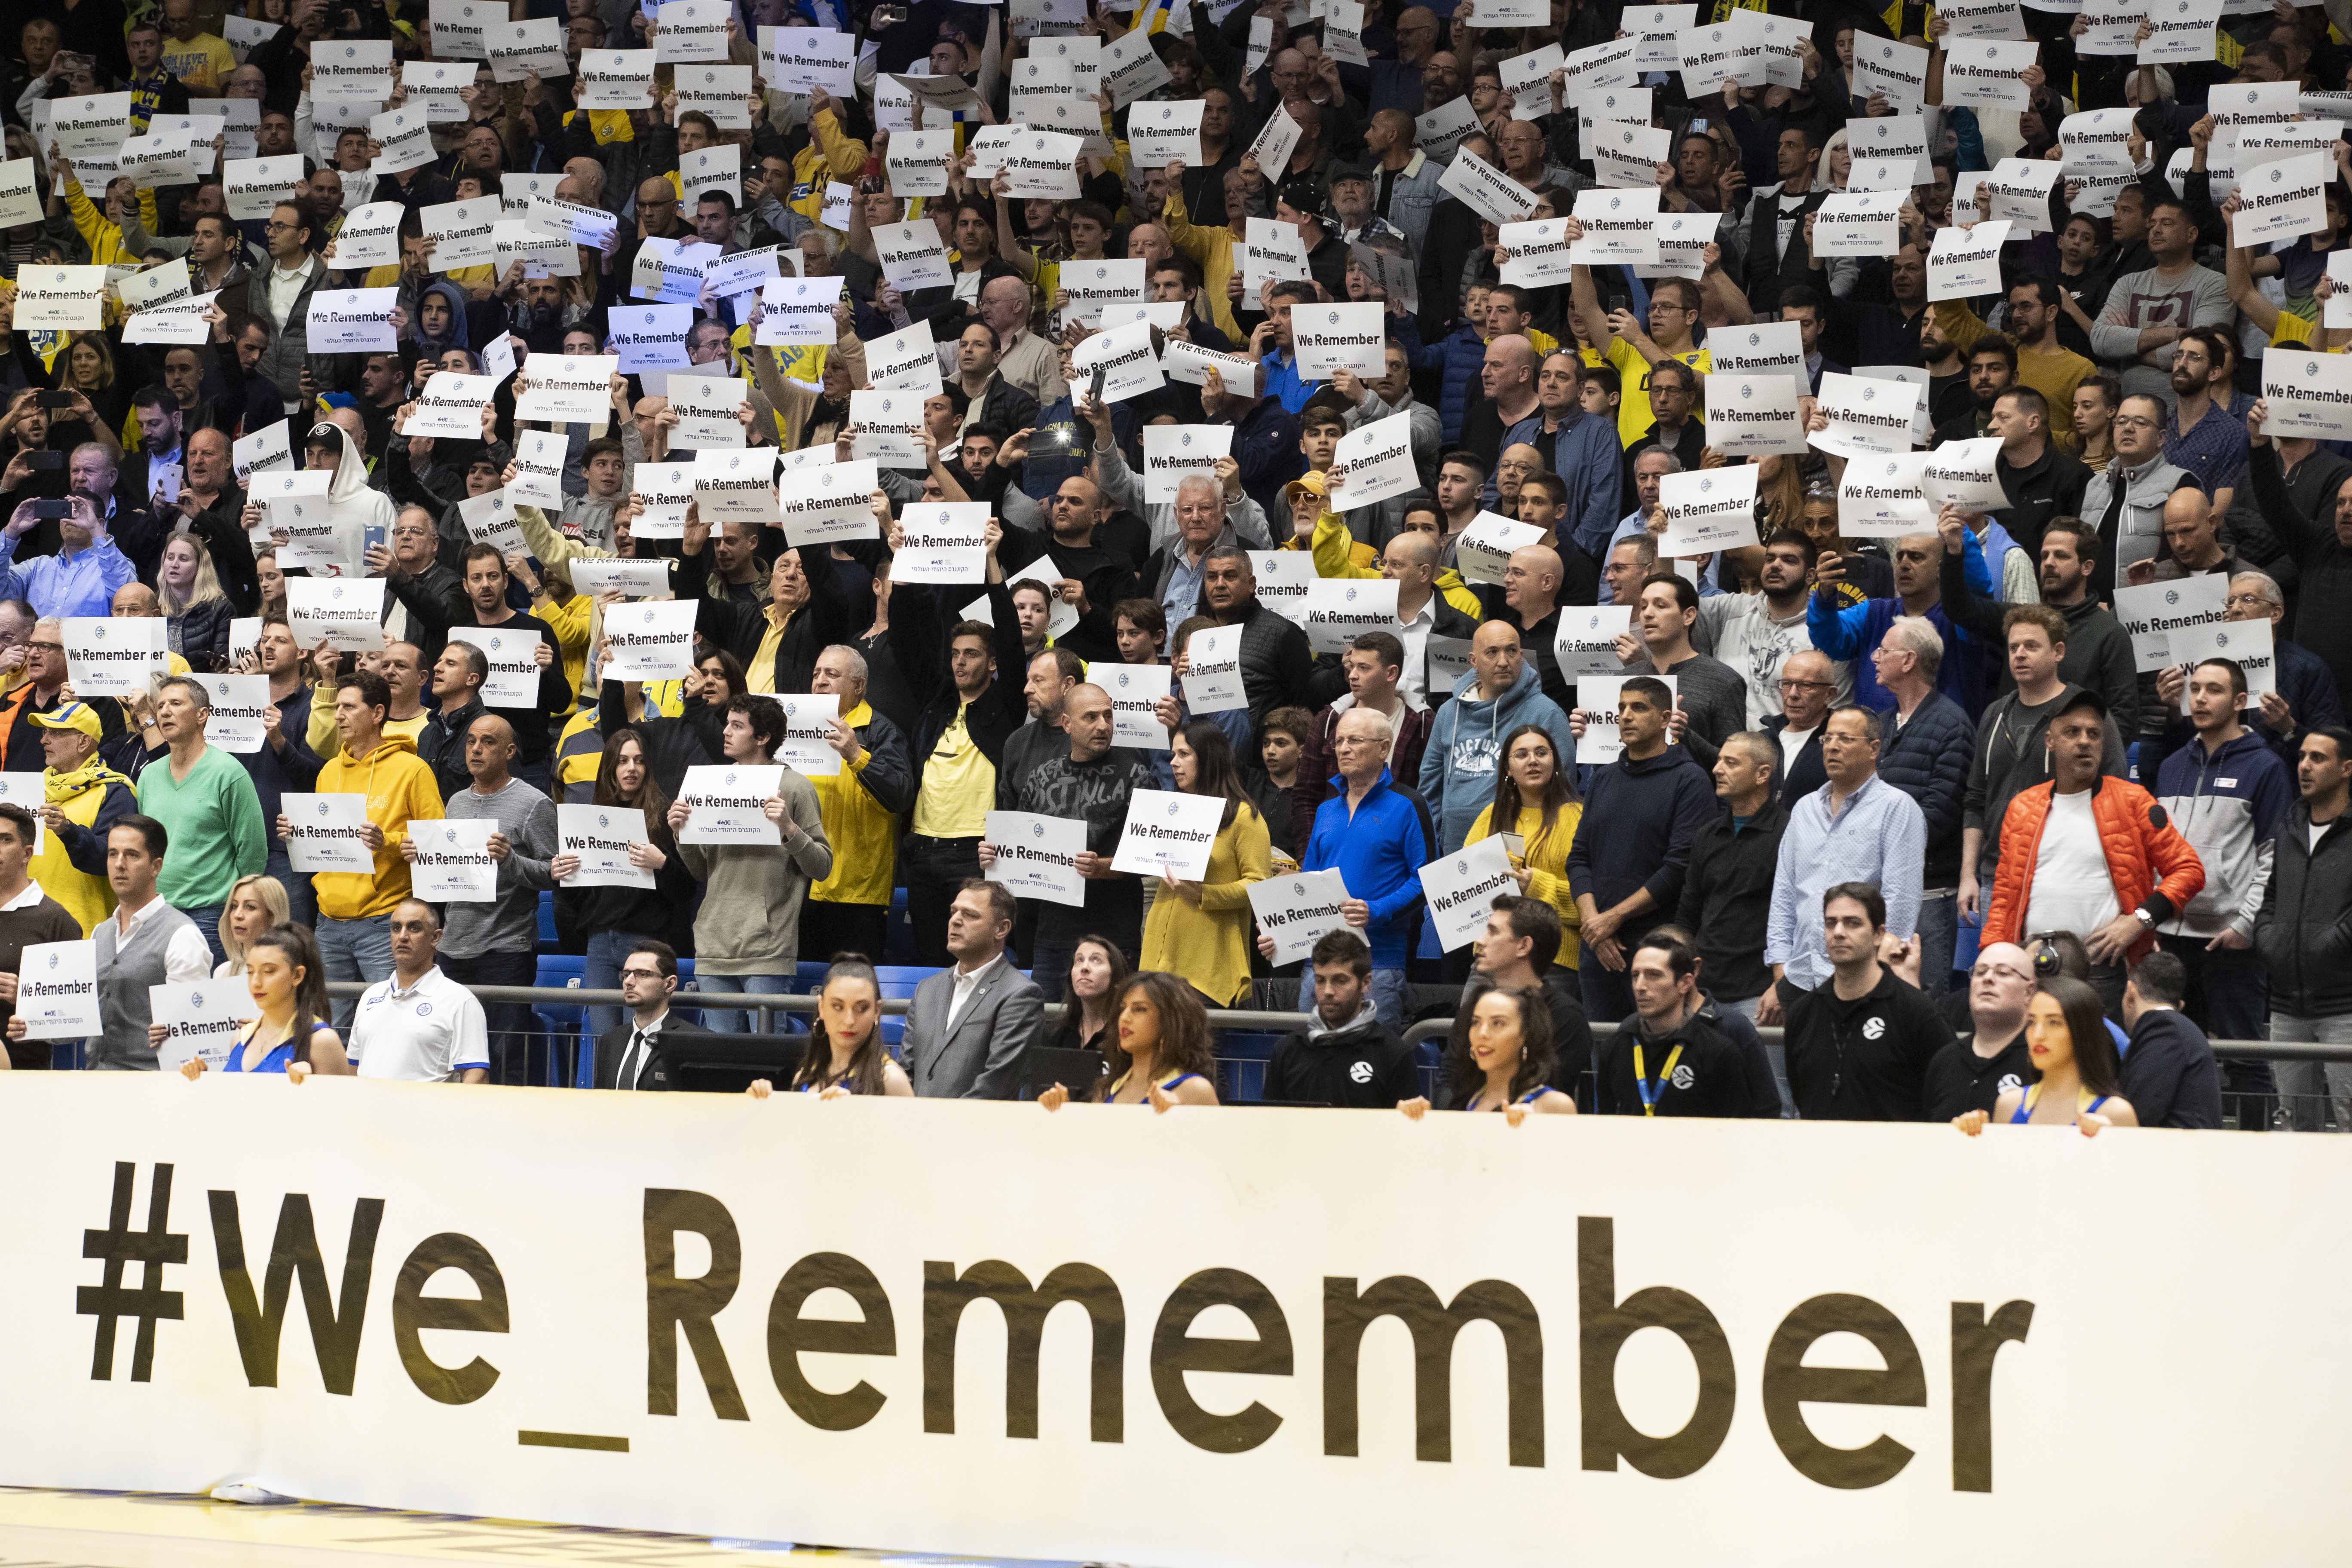 epa07316656 Israelis hold up 'We Remember' placards in the basketball stadium in Tel Aviv, Israel, 24 January 2019 before the start fo the Euroleague basketball match Maccabi Fox Tel Aviv vs Panathinaikos Opap Athens as they mark International Holocaust Remembrance Day.  EPA/JIM HOLLANDER